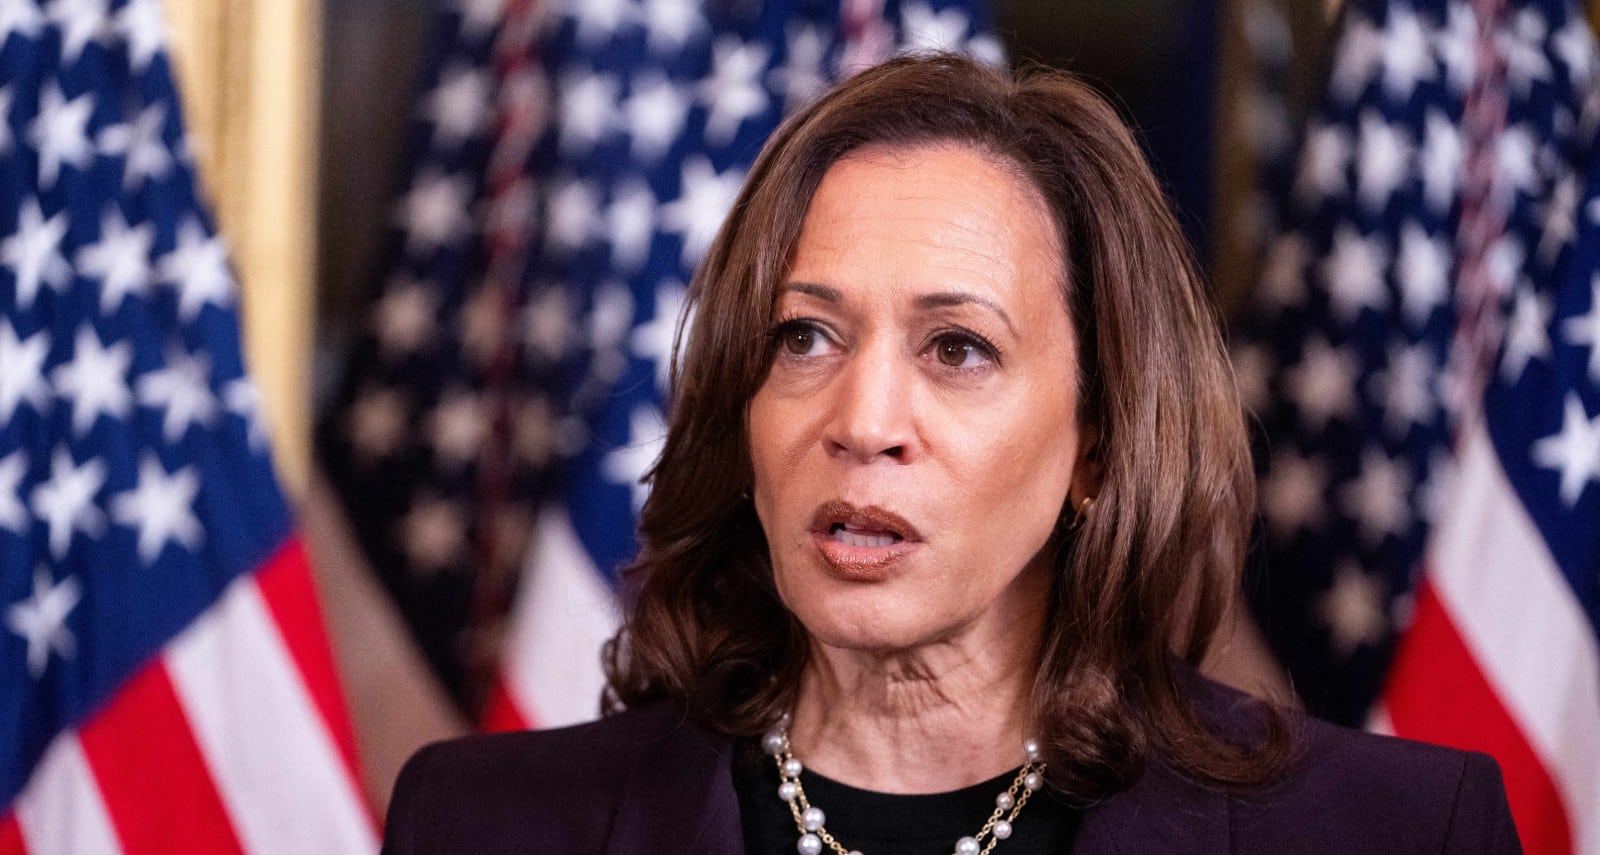 VP Harris' Prior Comments On ICE Come Back To Haunt Her